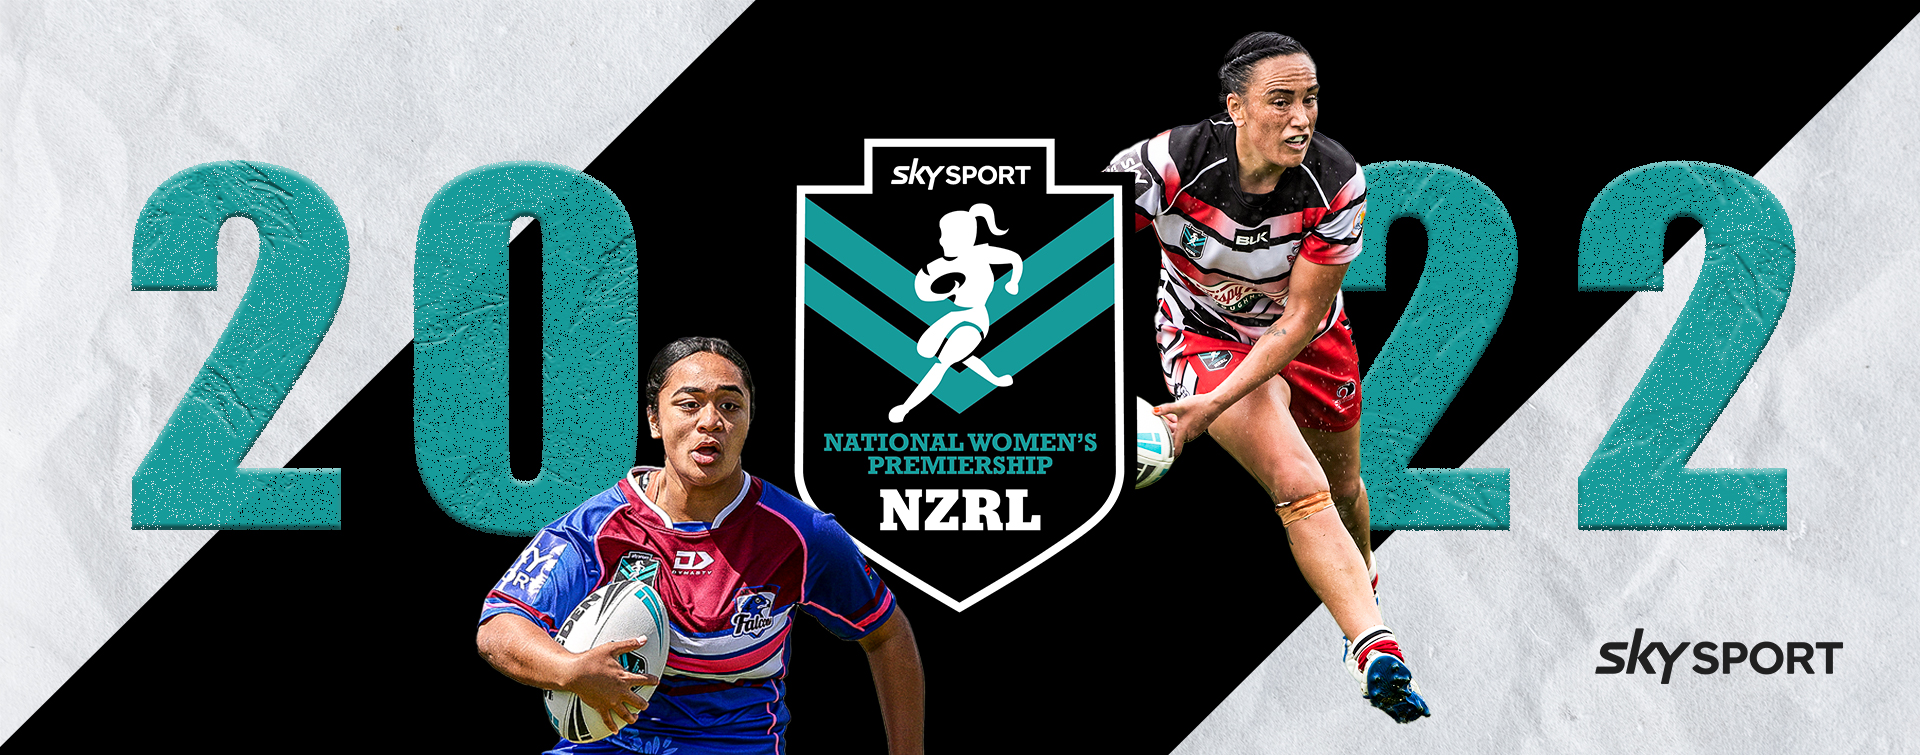 Sky Sport Womens Premiership among busiest womens rugby league calendar to date